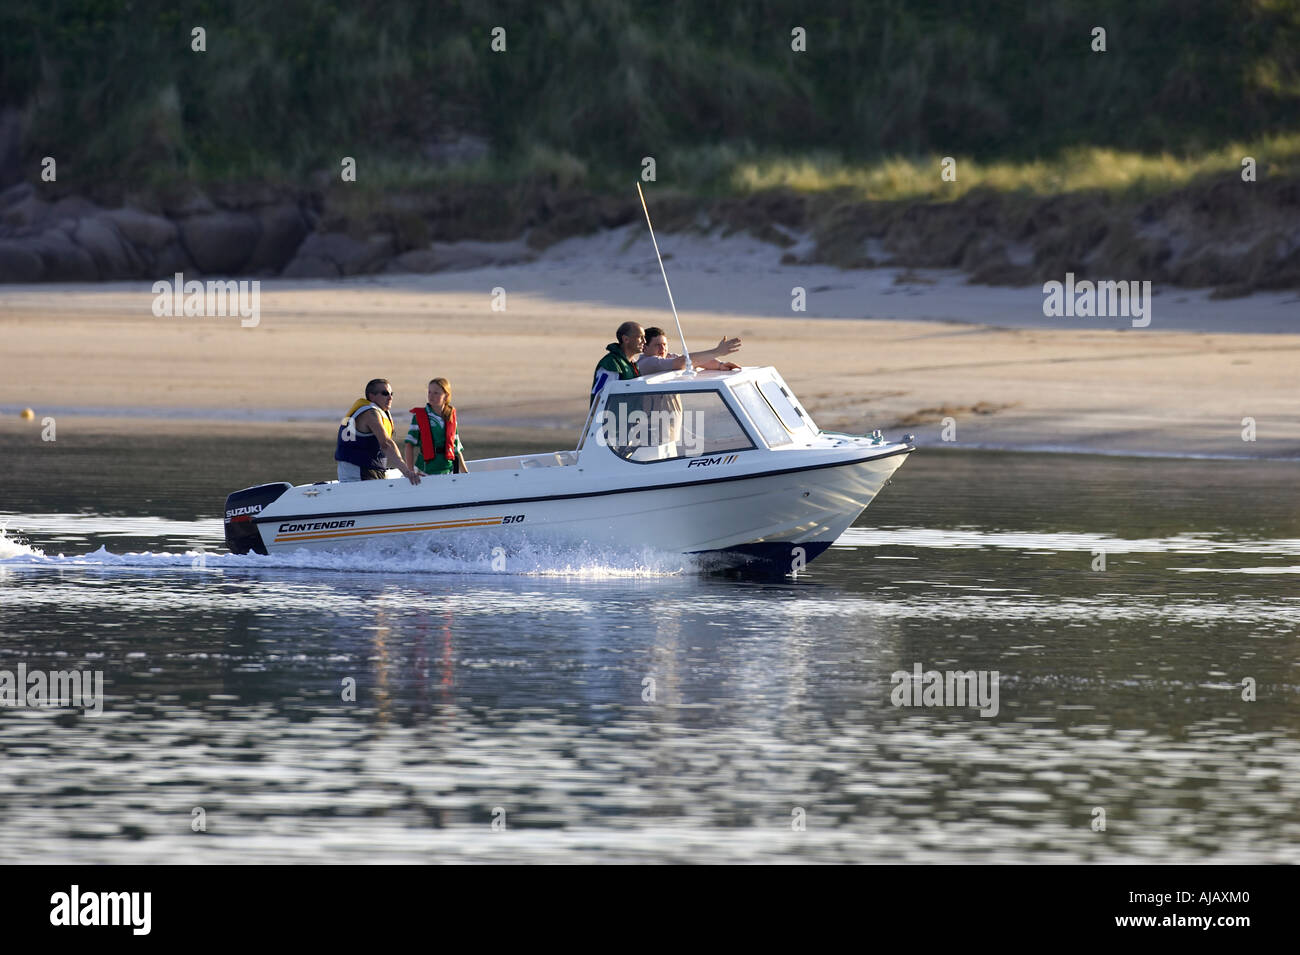 four people in lifejackets in small white pleasure fishing boat sails past bunbeg beach gweedore bay Stock Photo